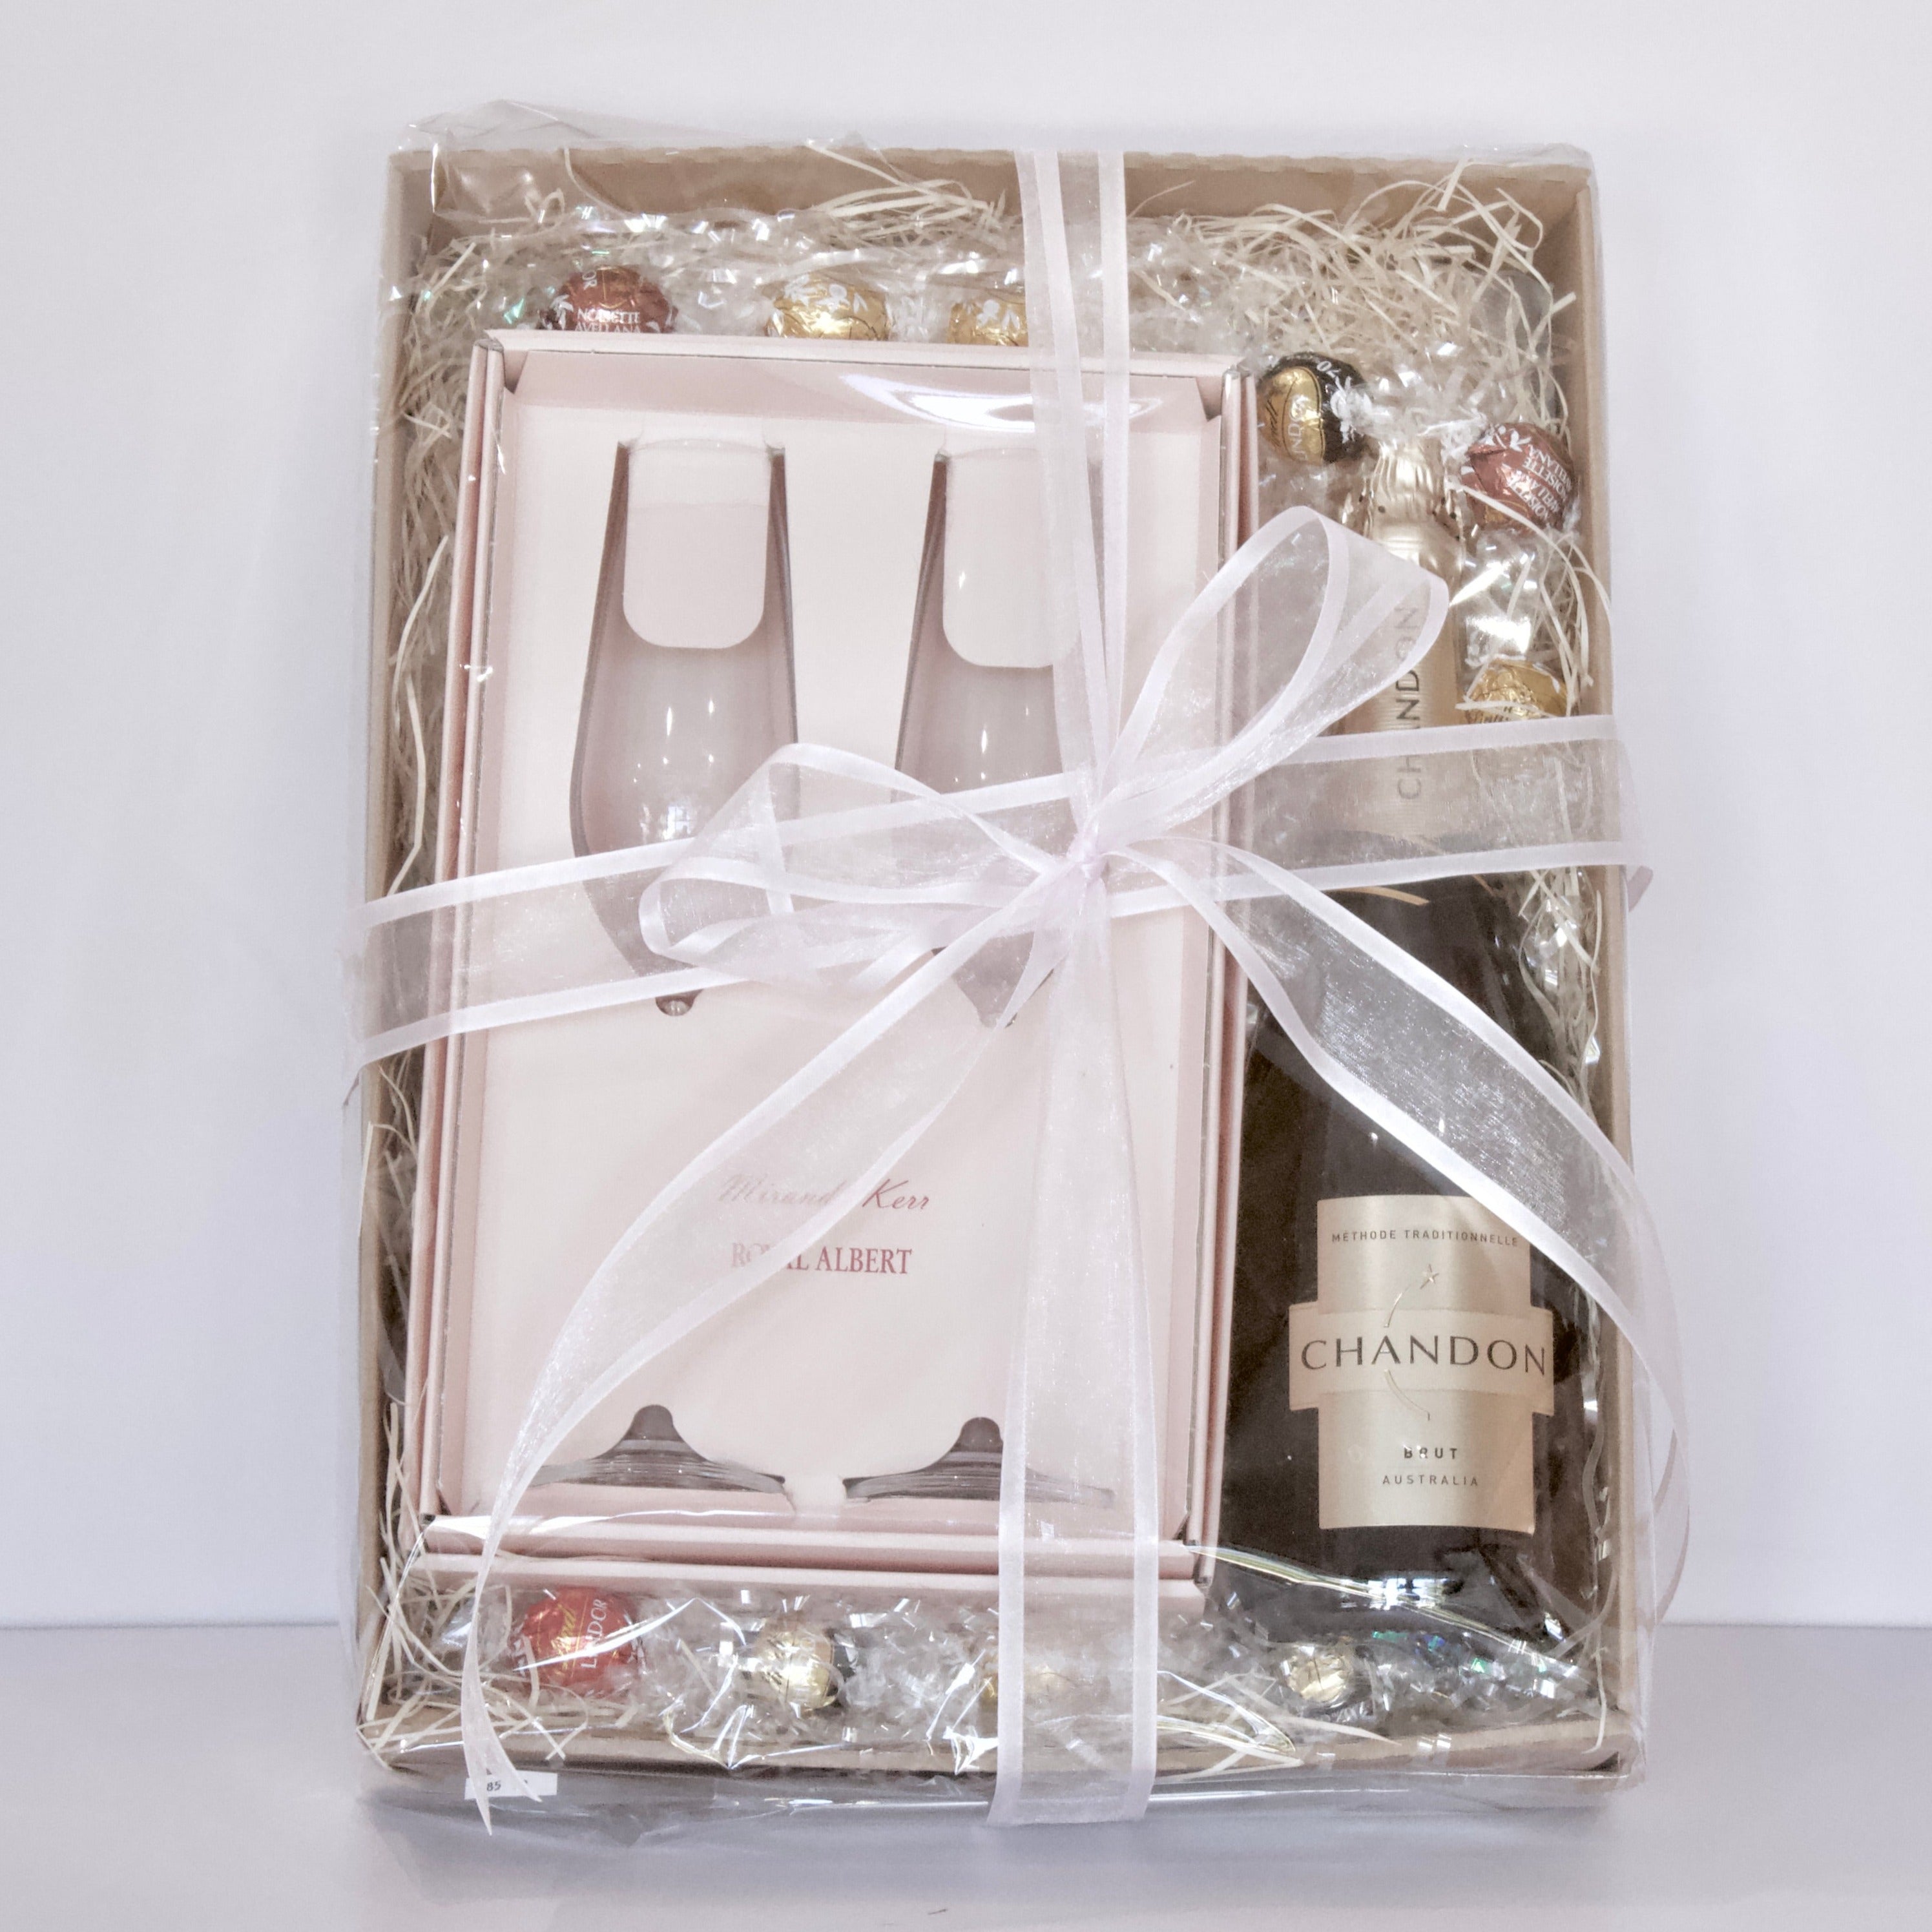 Hamper of Chandon Sparkling wine, twin set of champagne flutes and chocolate for Mum to enjoy on Mother's Day